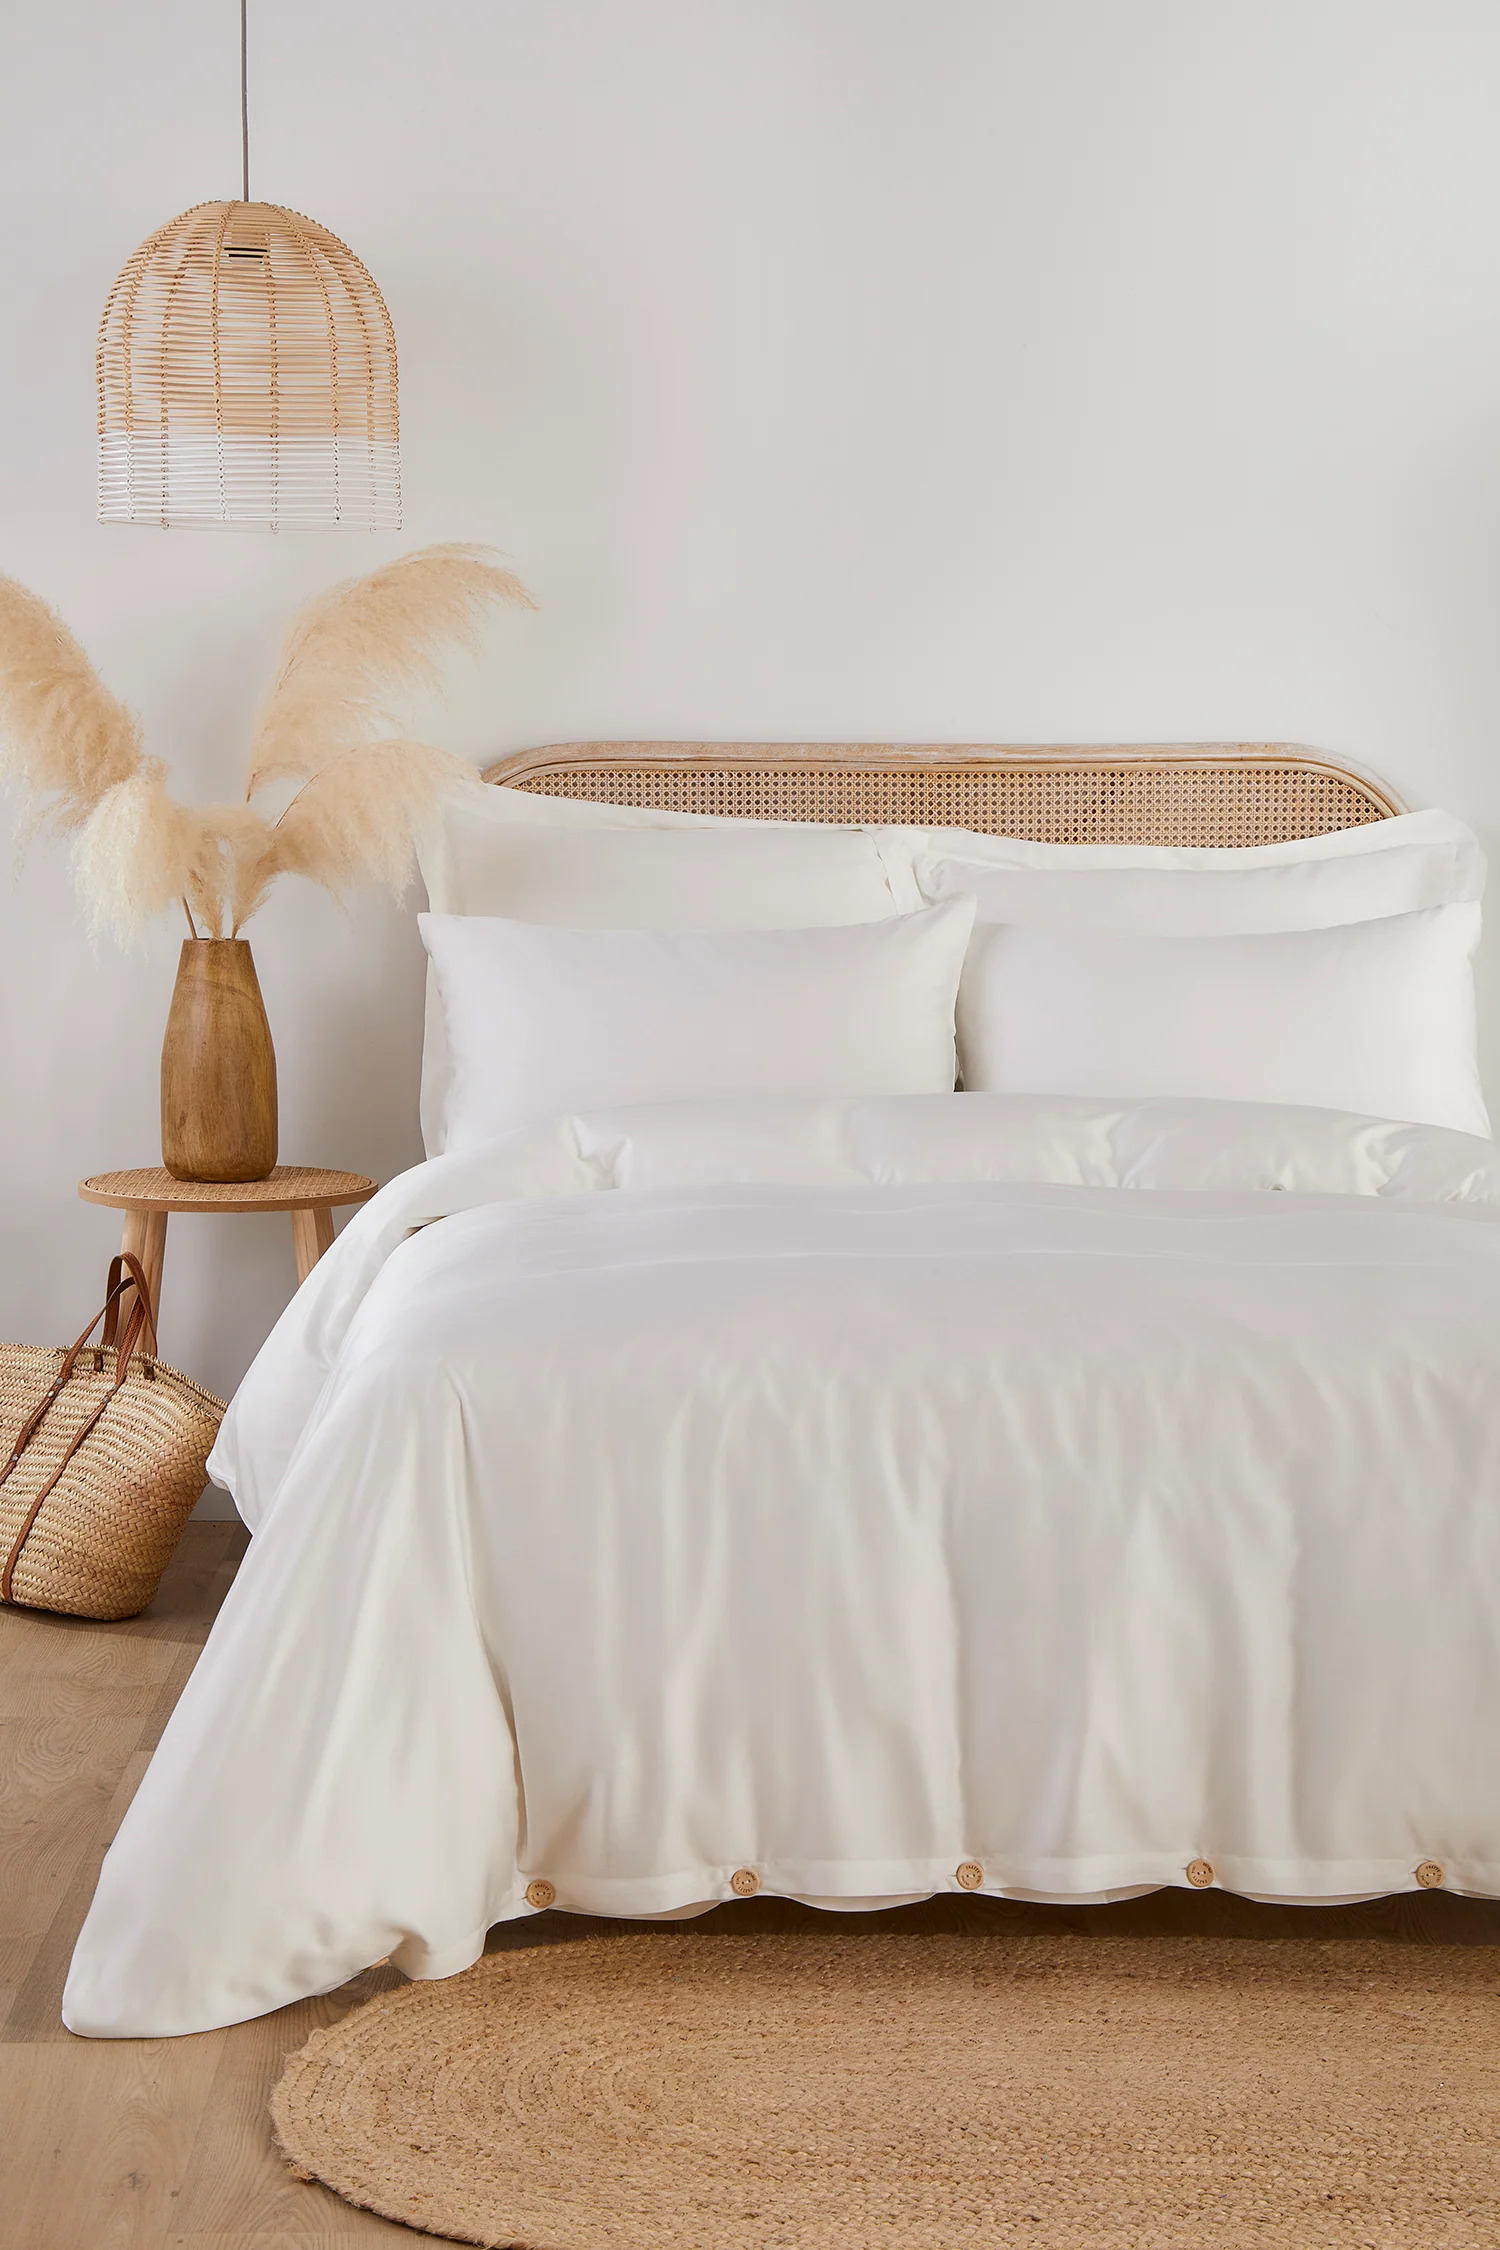 Elevate Your Sleep Experience with Bamboo Bedding